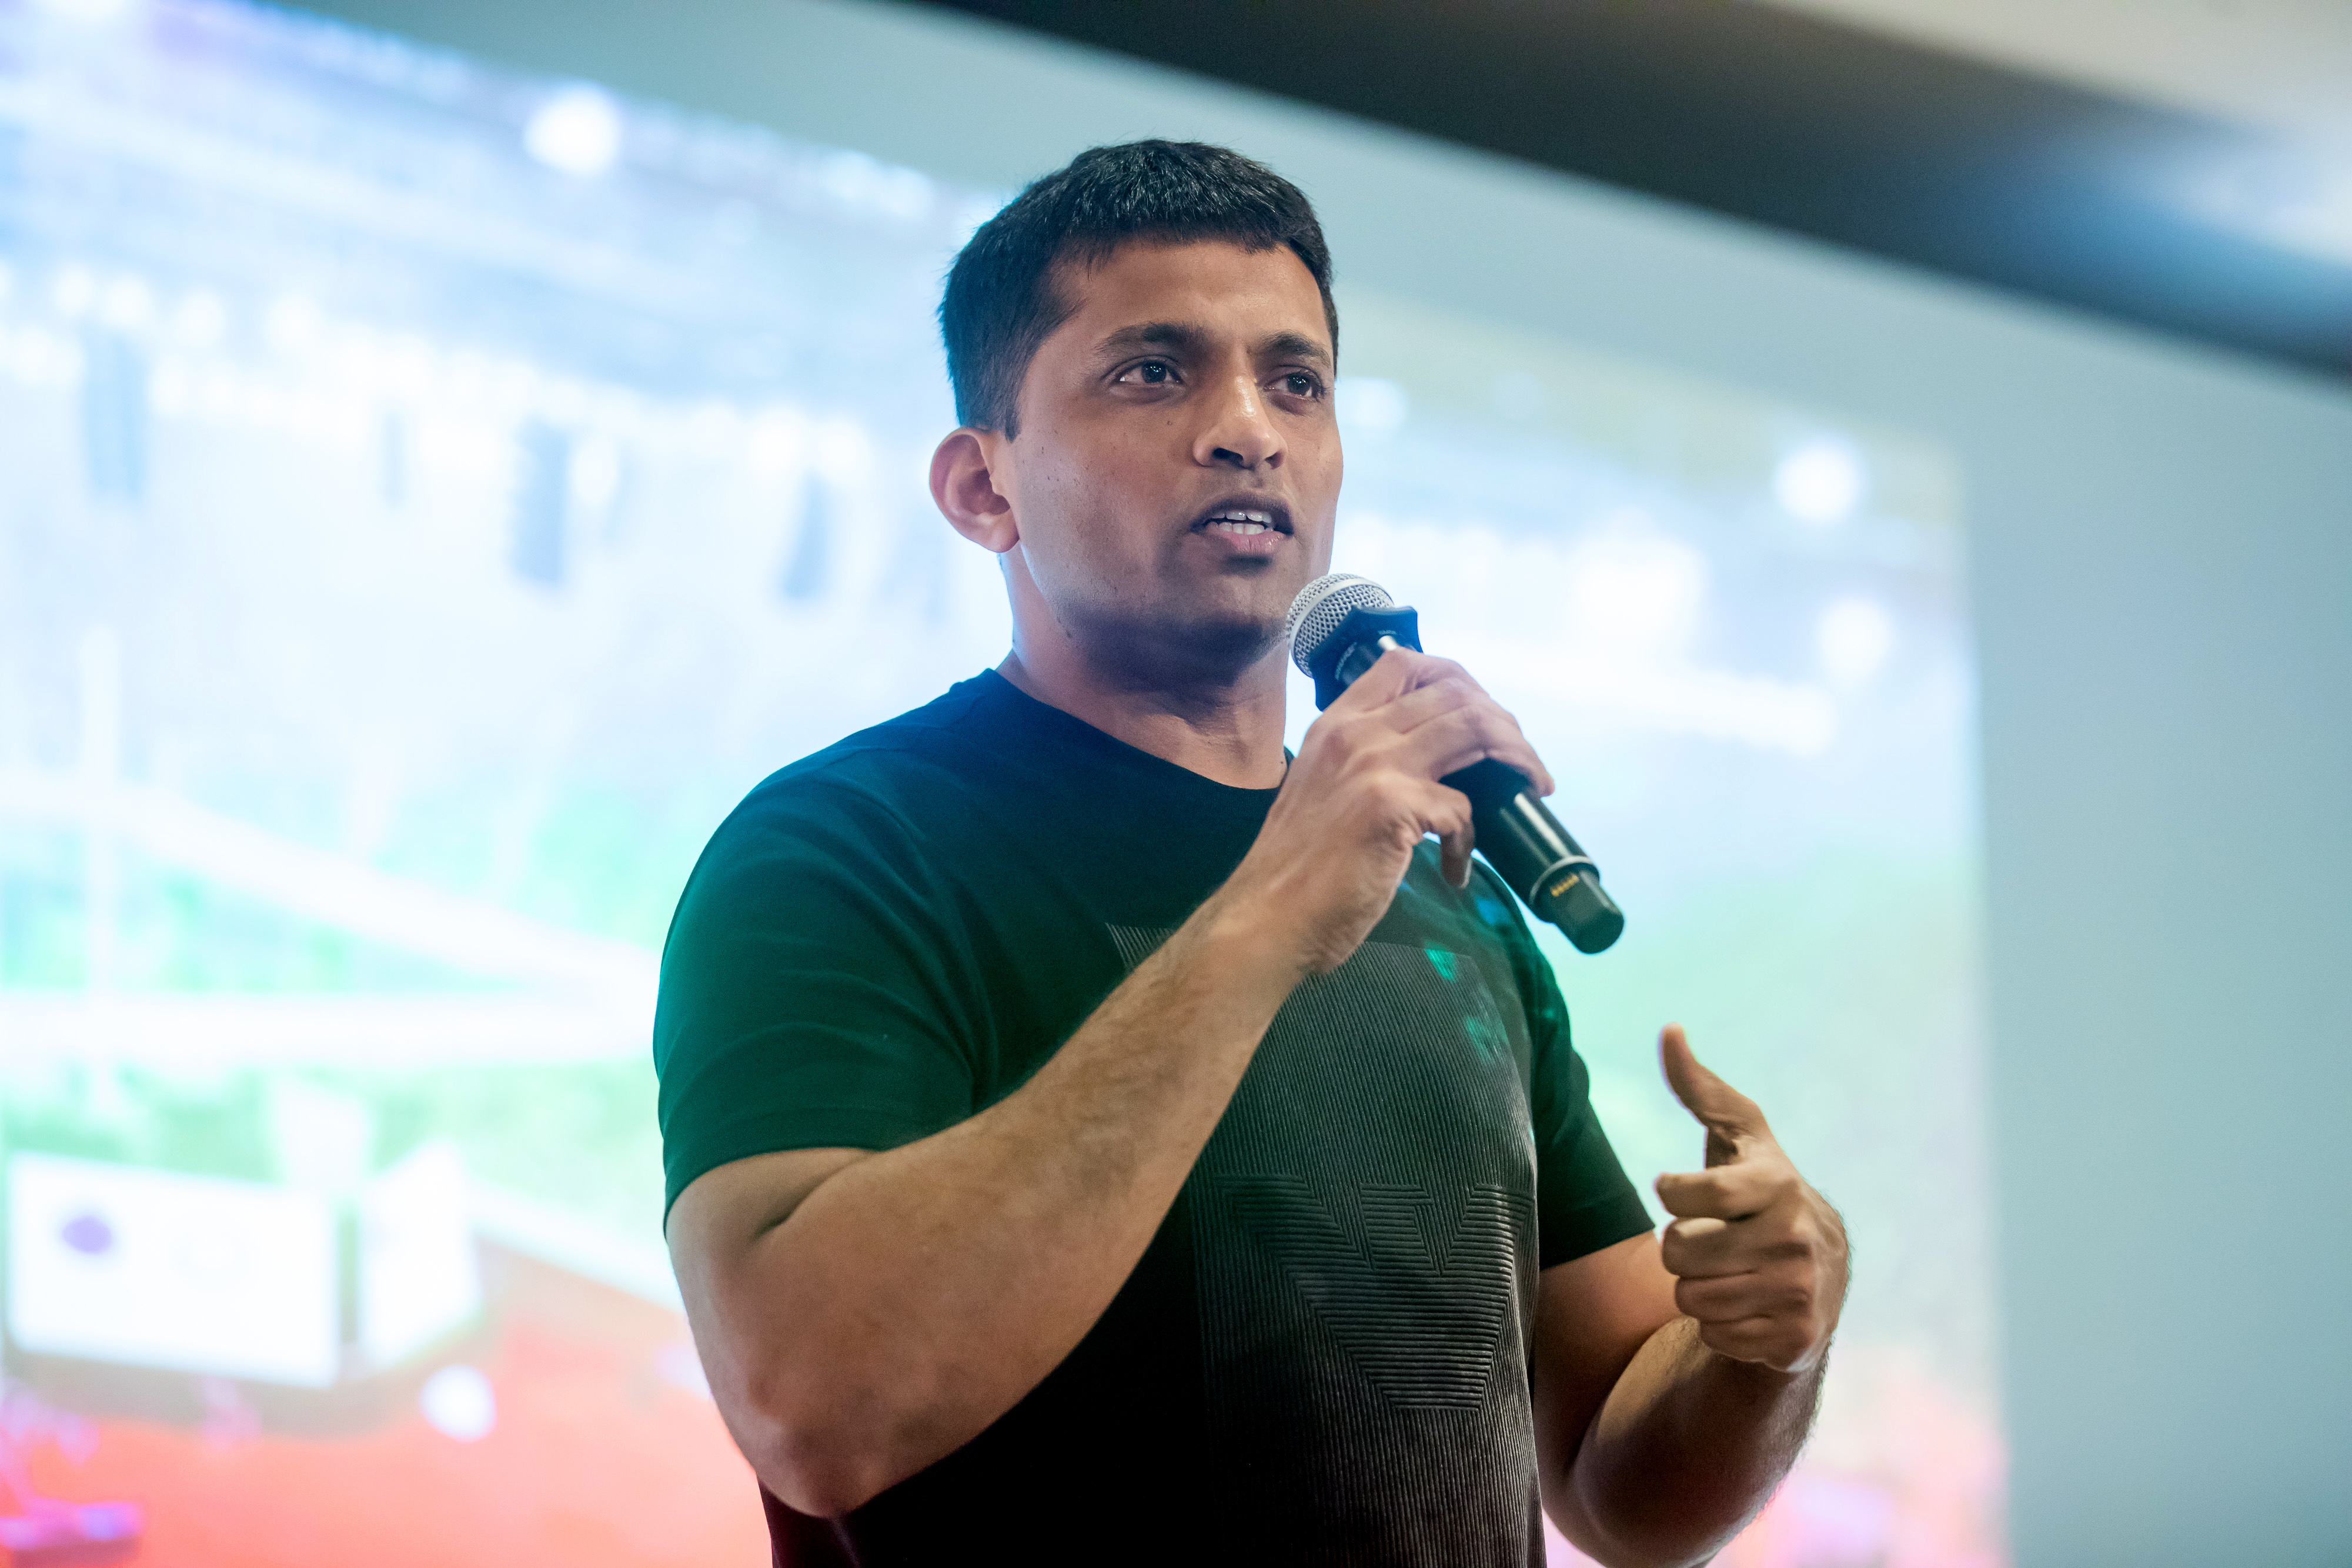 Byju's founder, ousted by shareholders, says rumors of his firing 'greatly exaggerated'